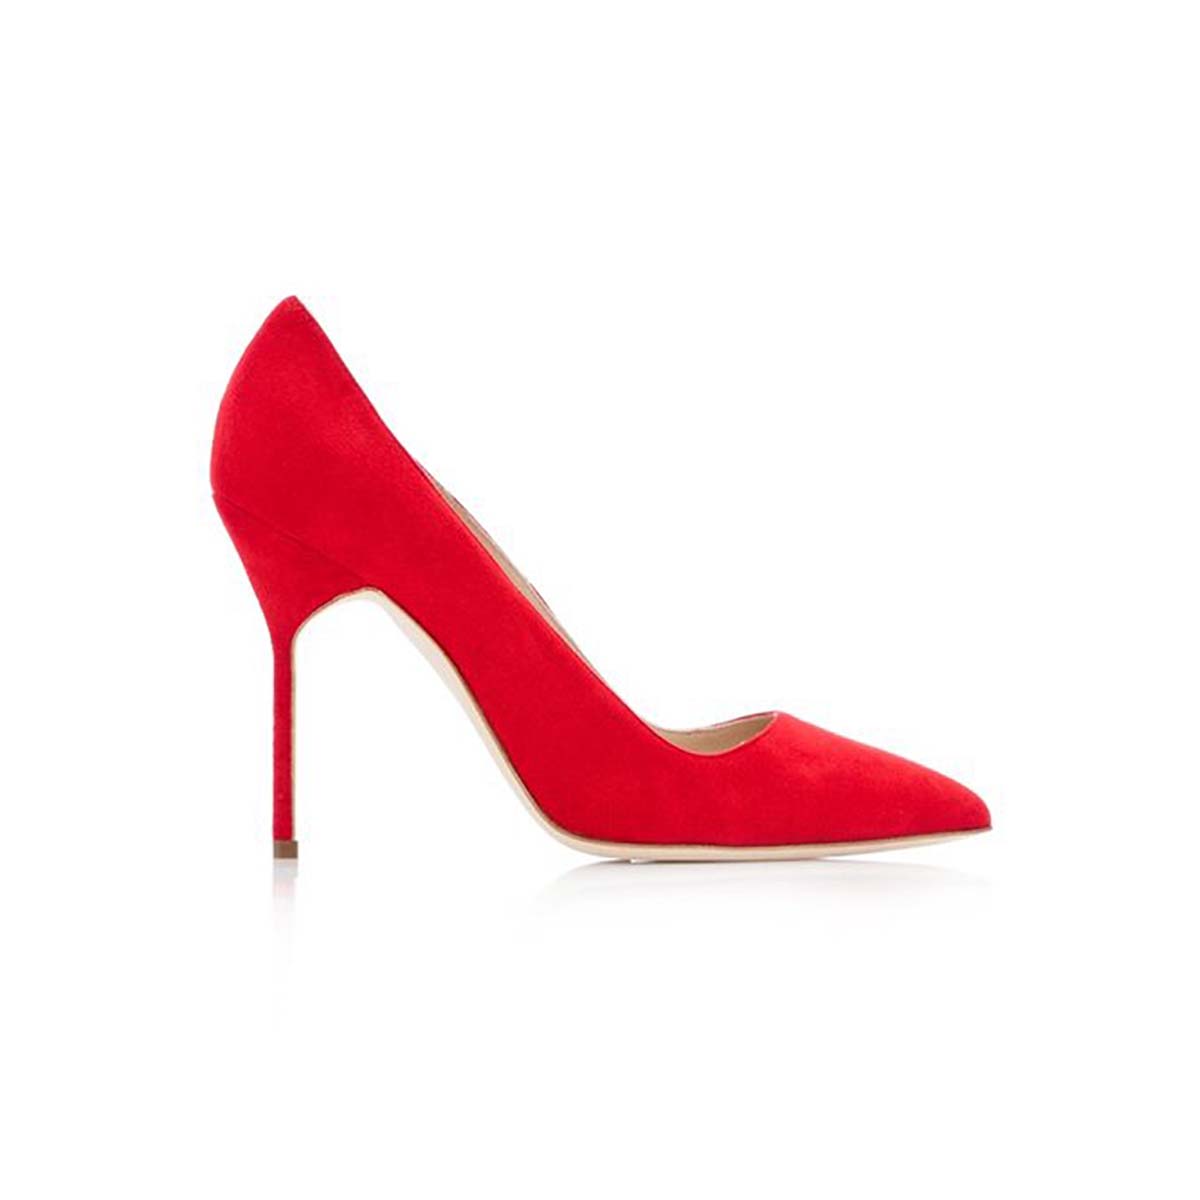 Manolo Blahnik Women BB Suede Pointy Pump Shoes Red